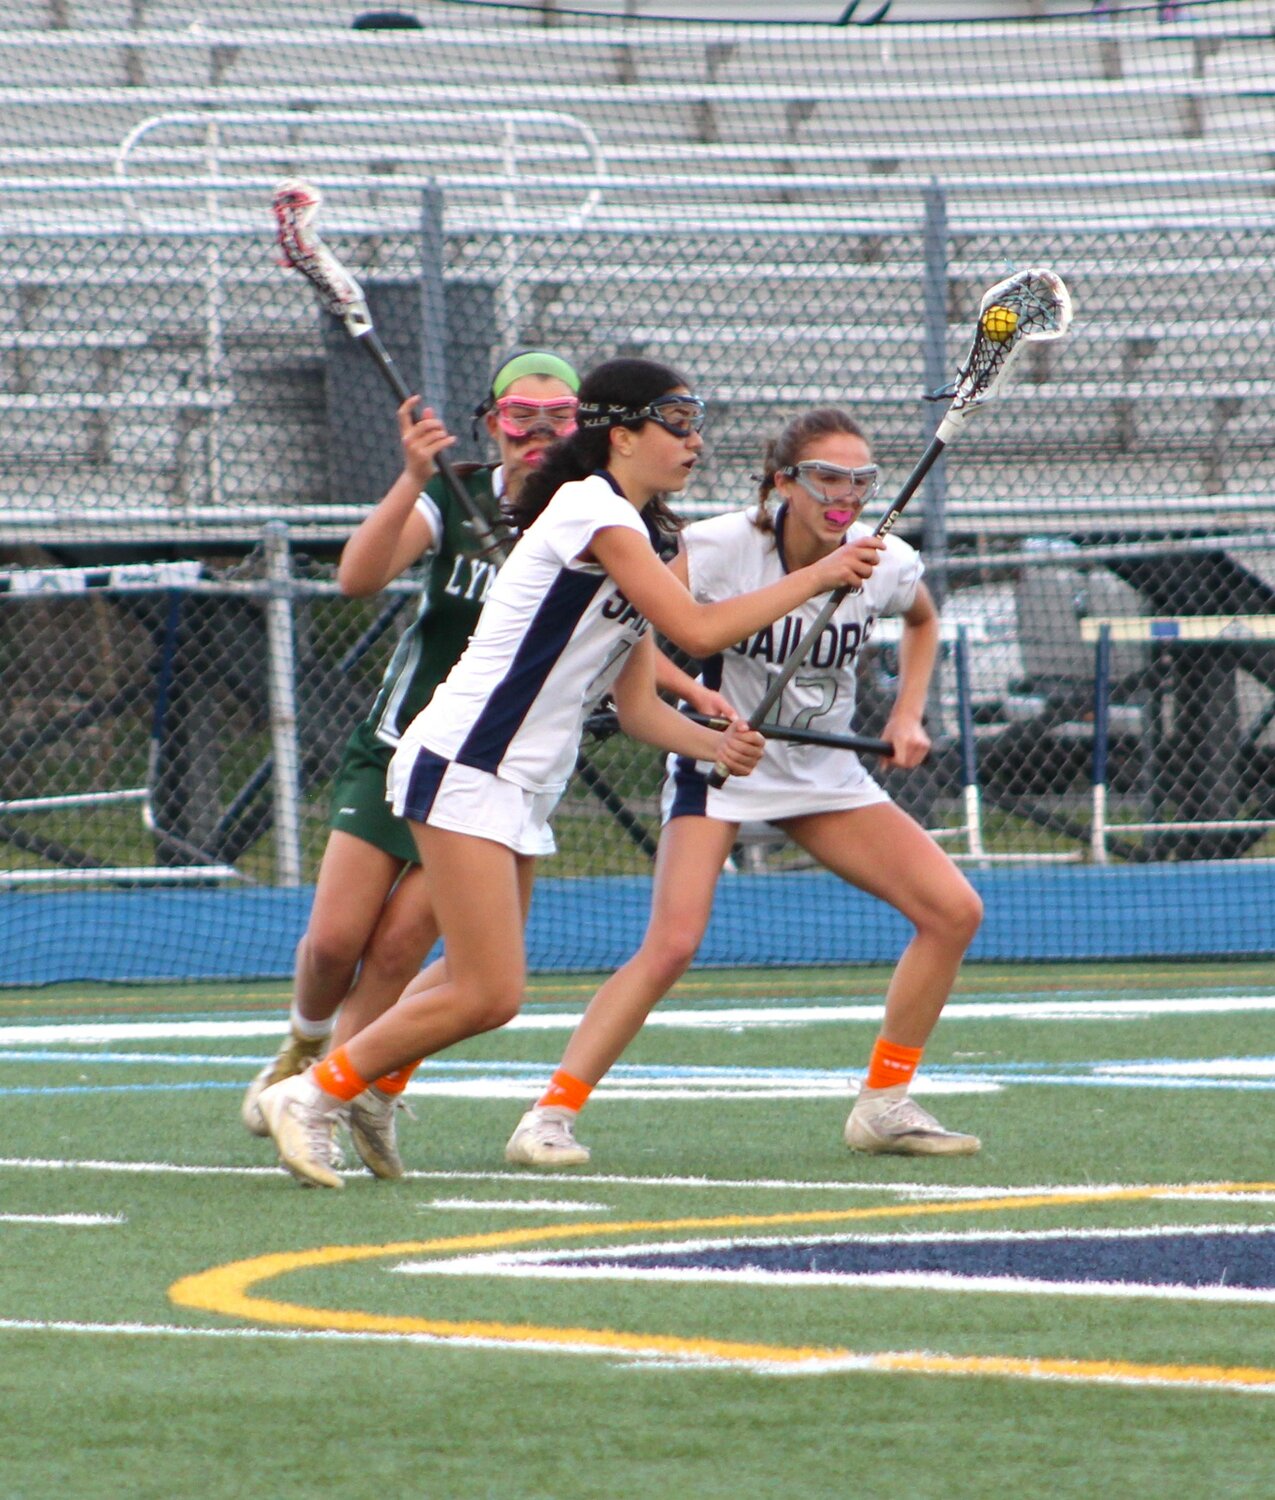 Ella Salonia scored three of the Oceanside junior varsity lacrosse team’s eight goals on May 4, helping the Sailors beat Lynbrook. The game was dedicated to Ella’s older sister, Ava, a team member who is battling a rare form of leukemia.